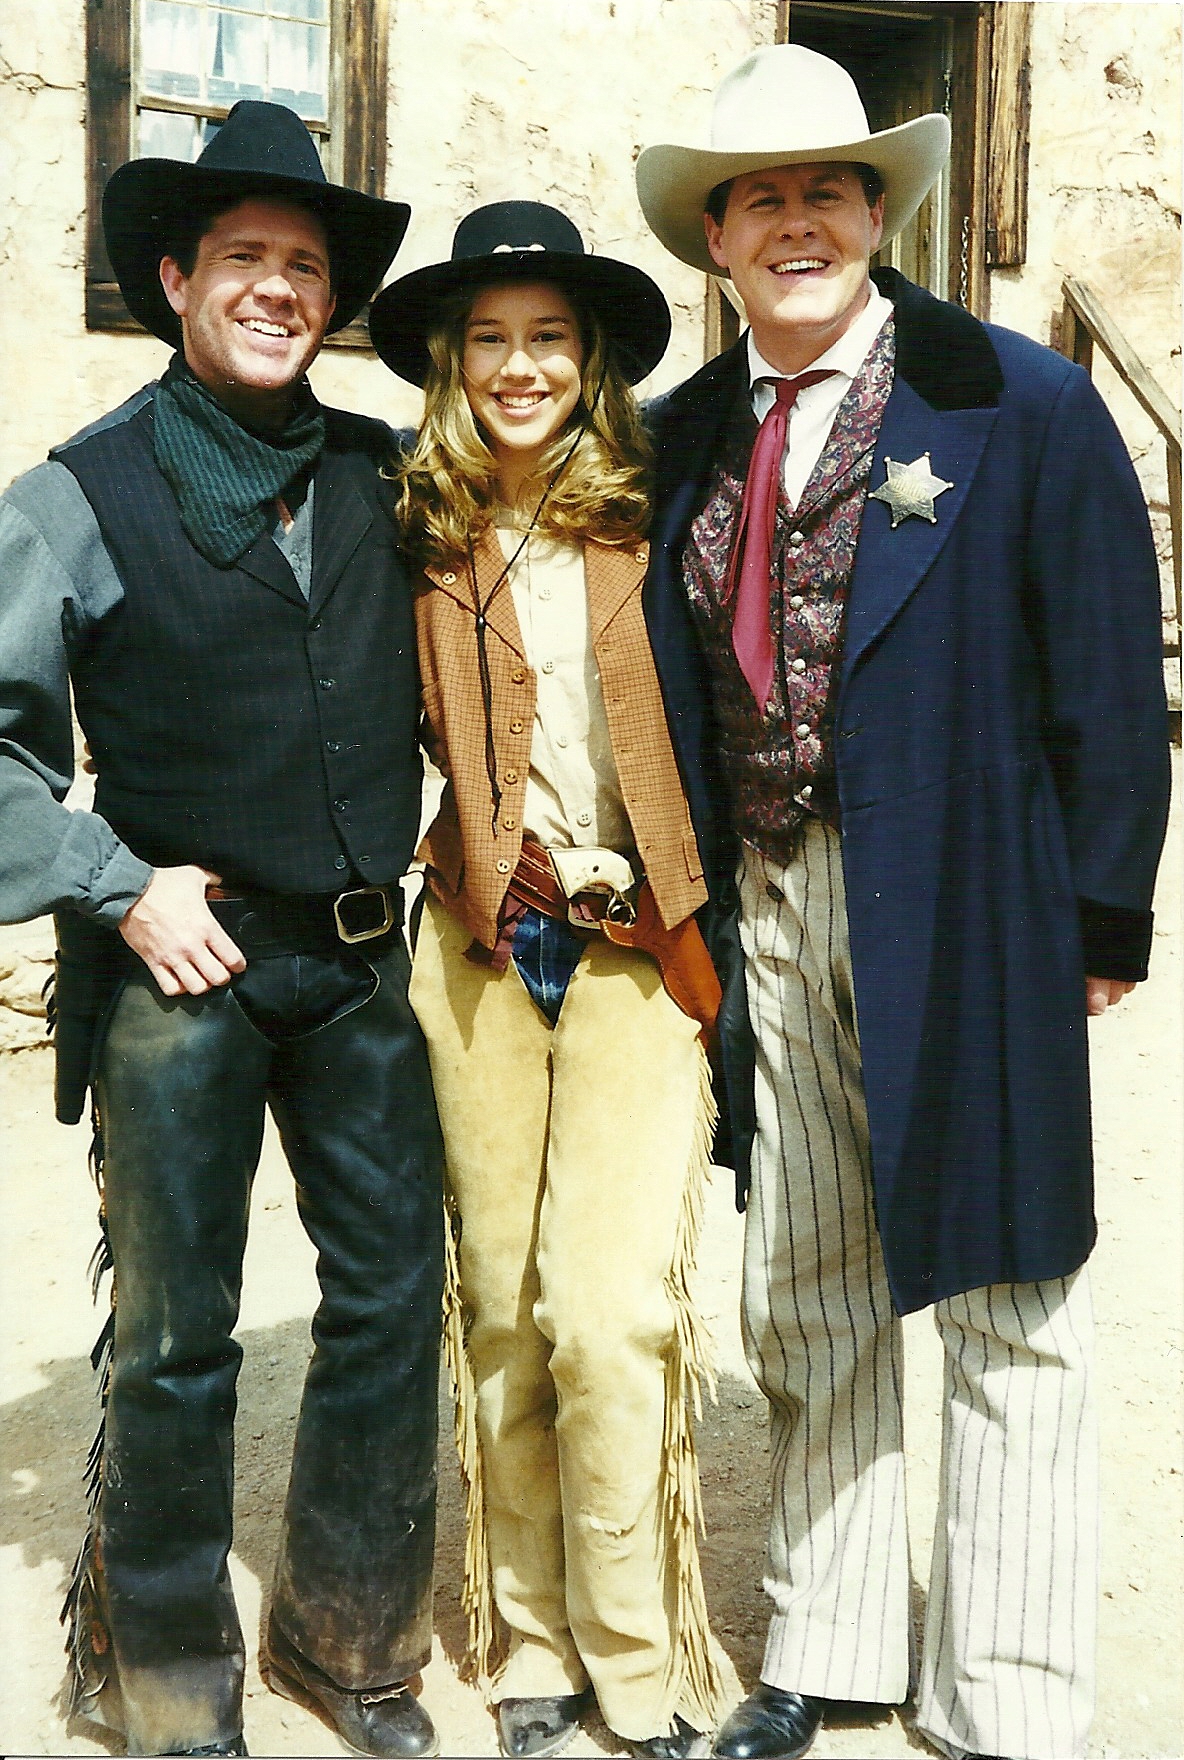 Butch McCain, Talia Osteen and Ben McCain in Calico Junction.